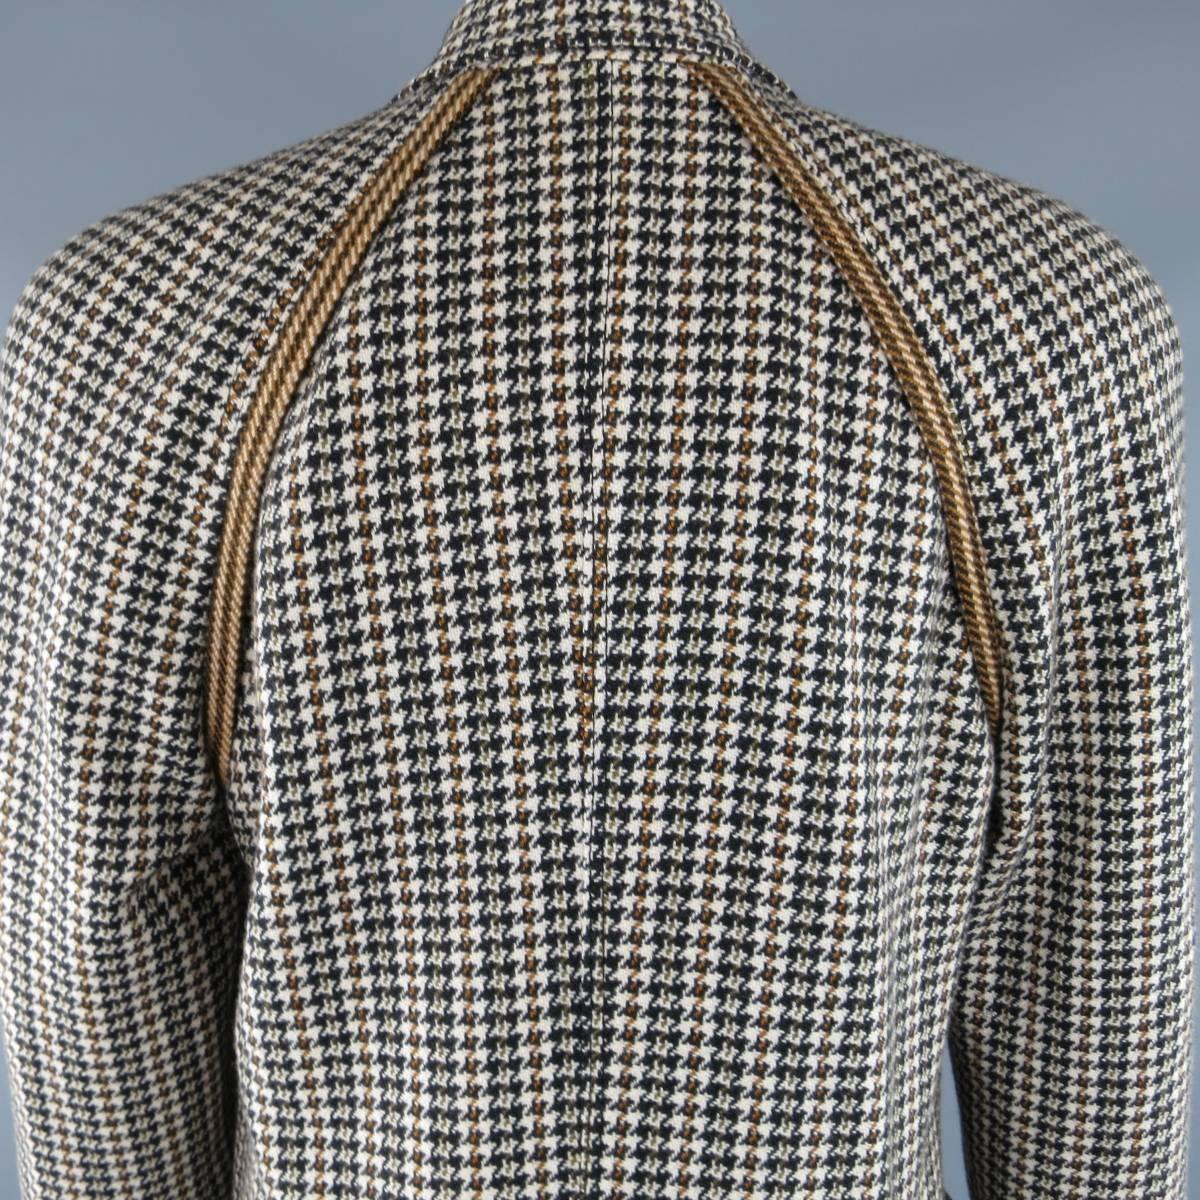 GIANNI VERSACE 1980s Size 8 Beige Houndstooth Cashmere Double Breasted Jacket 3